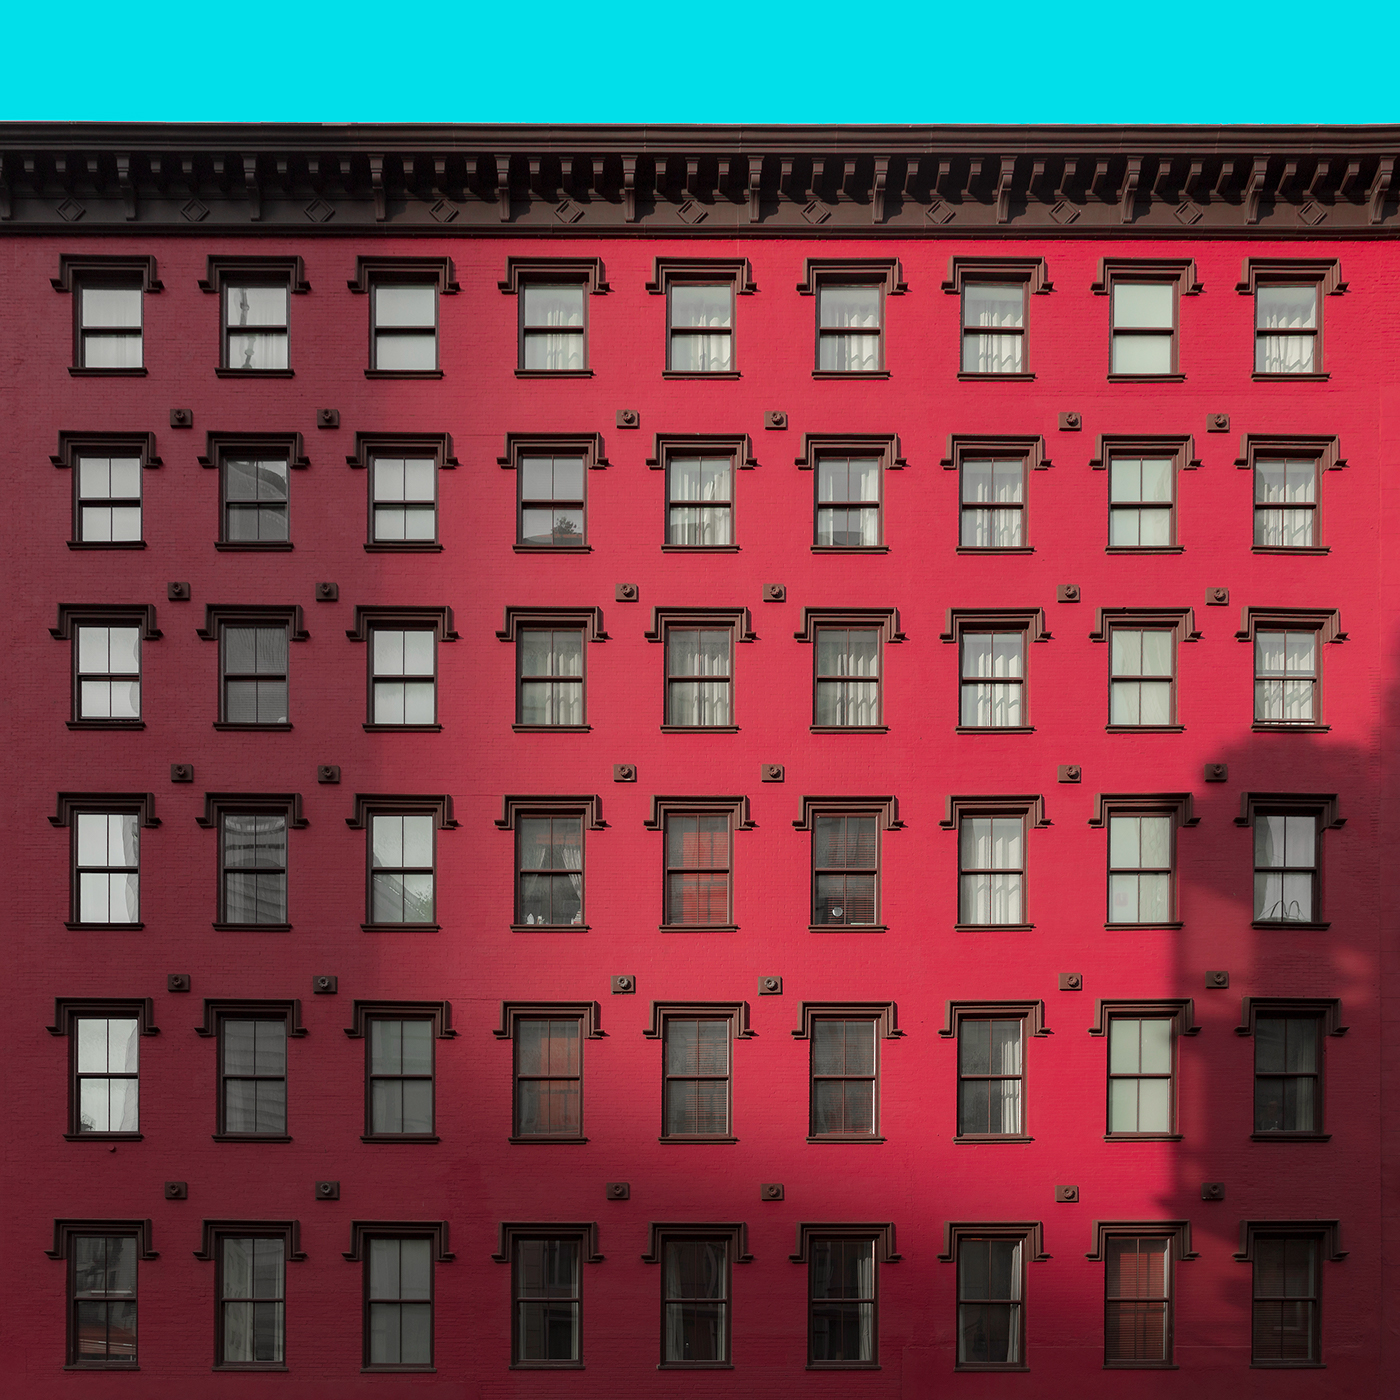 architecture usa New York nyc Patterns art buildings minimal color Canon